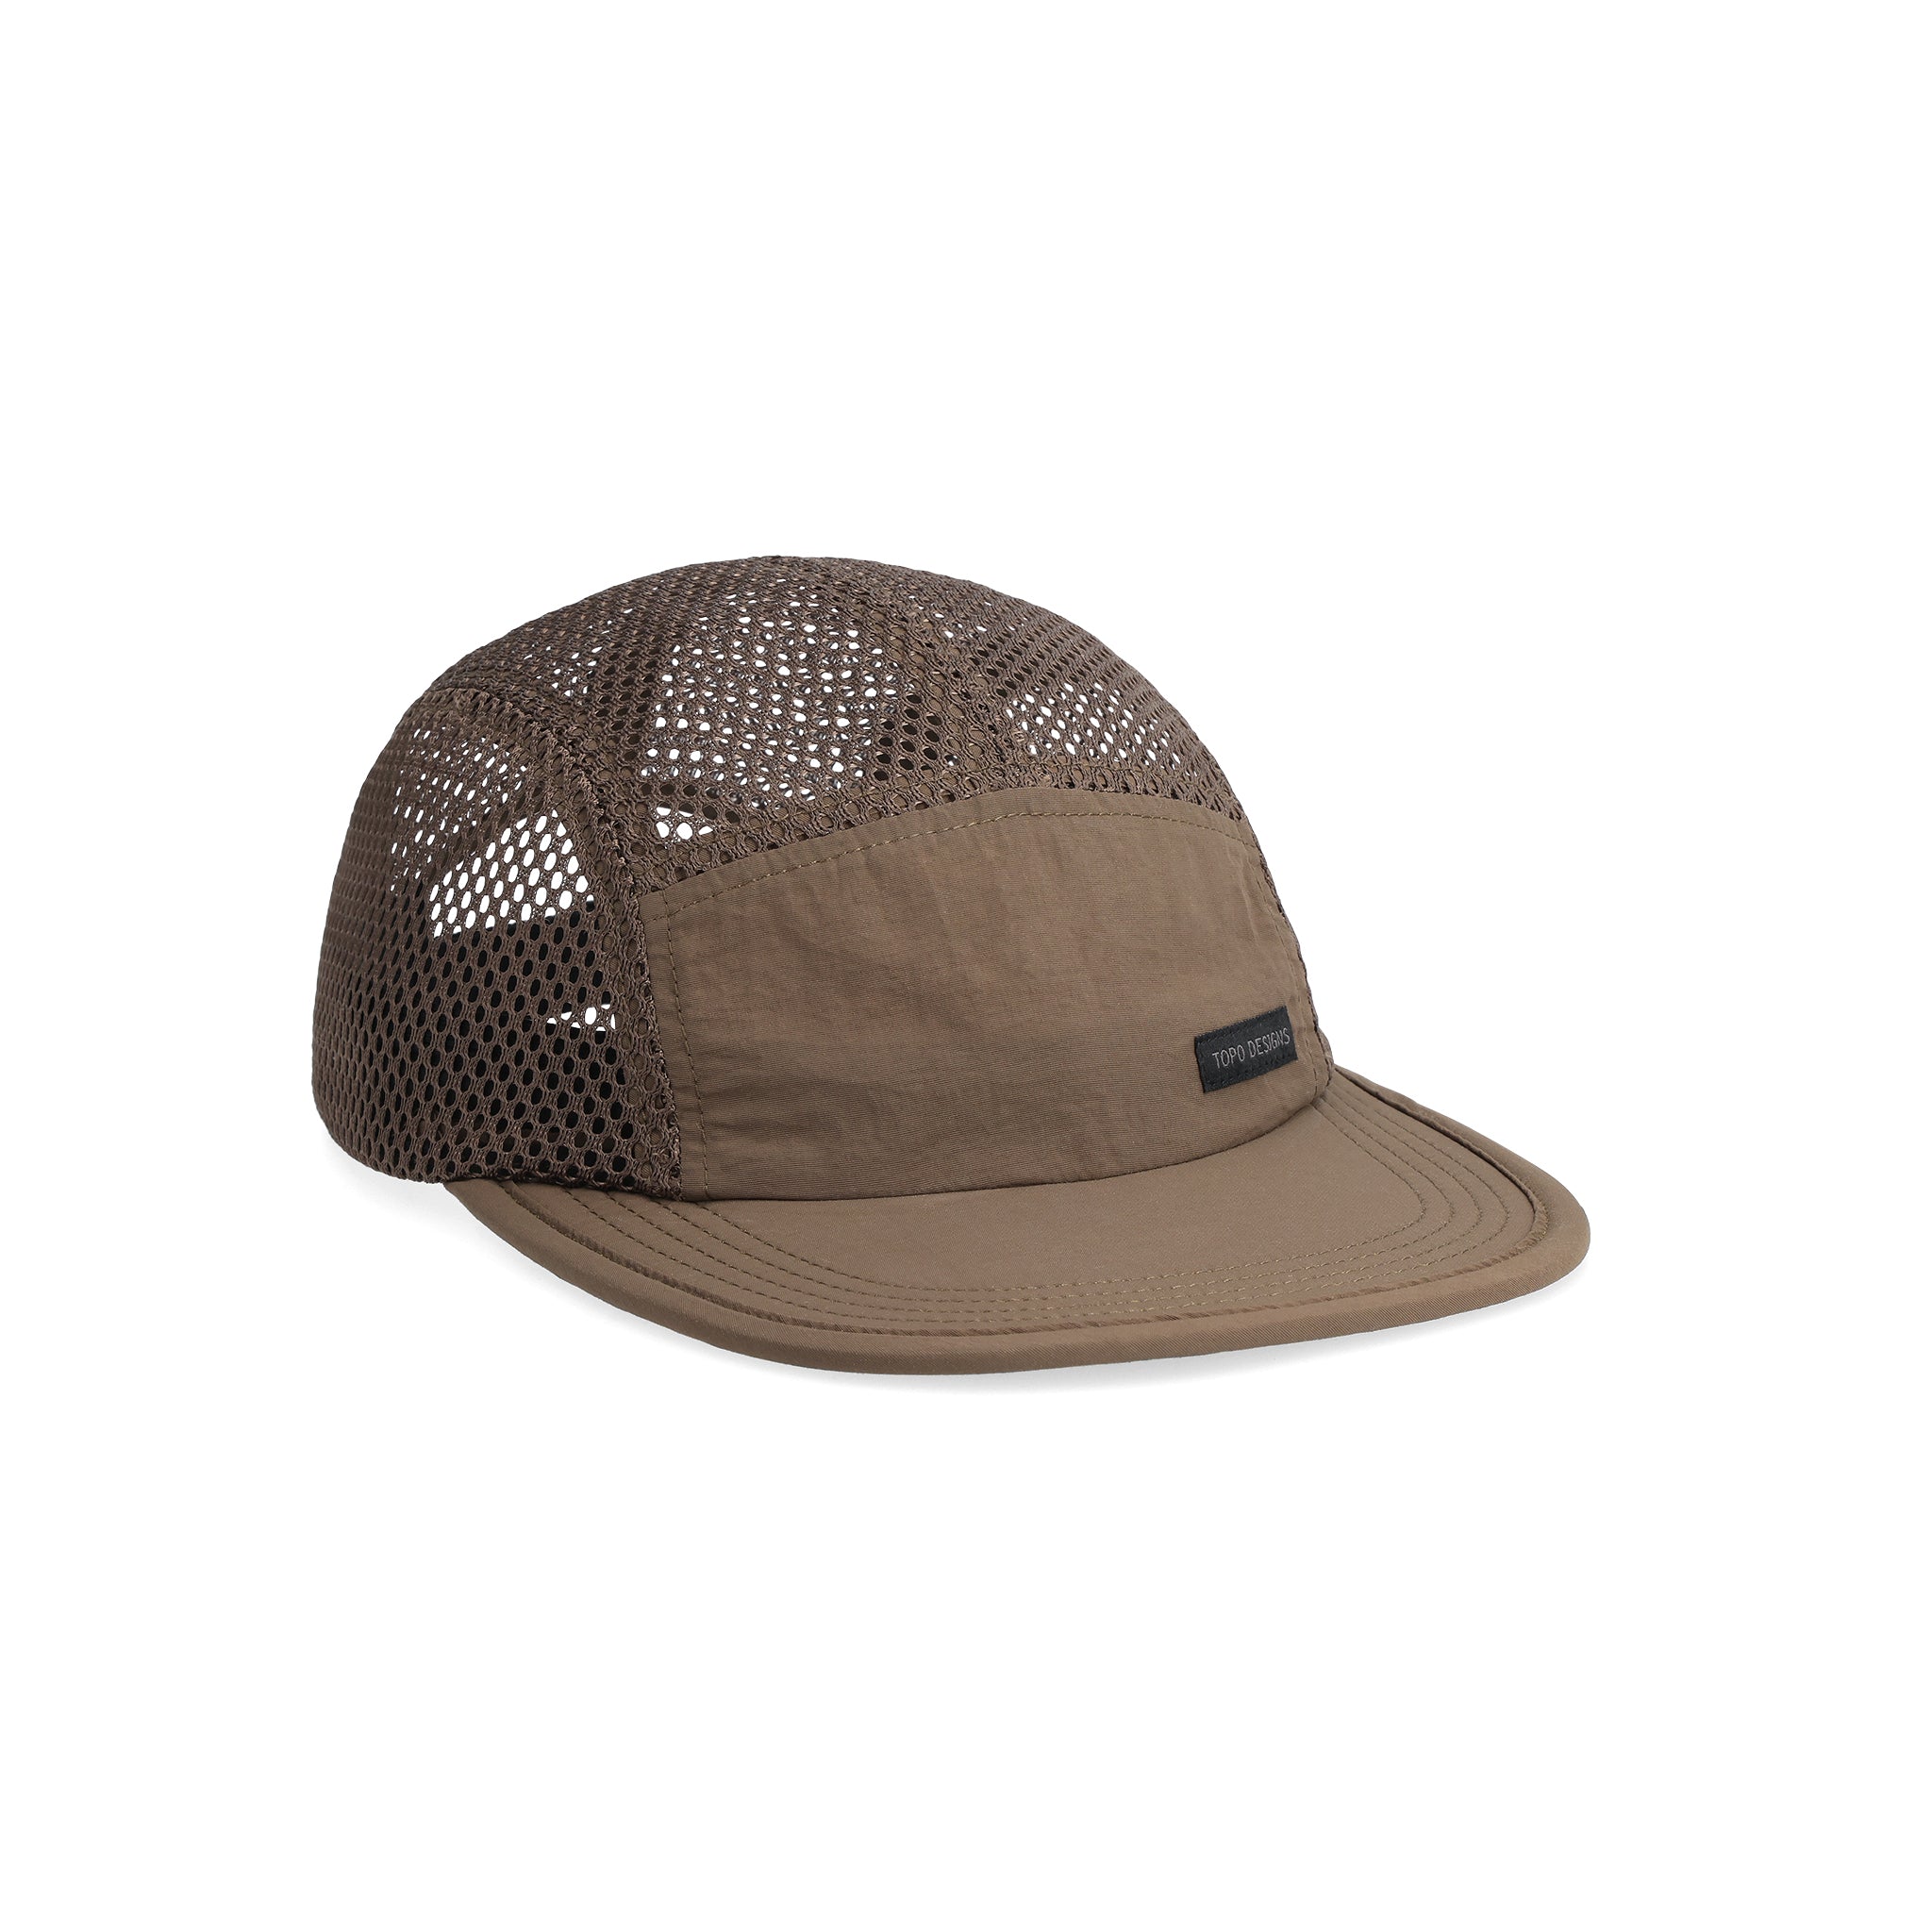 Front View of Topo Designs Global Hat in "Desert Palm"